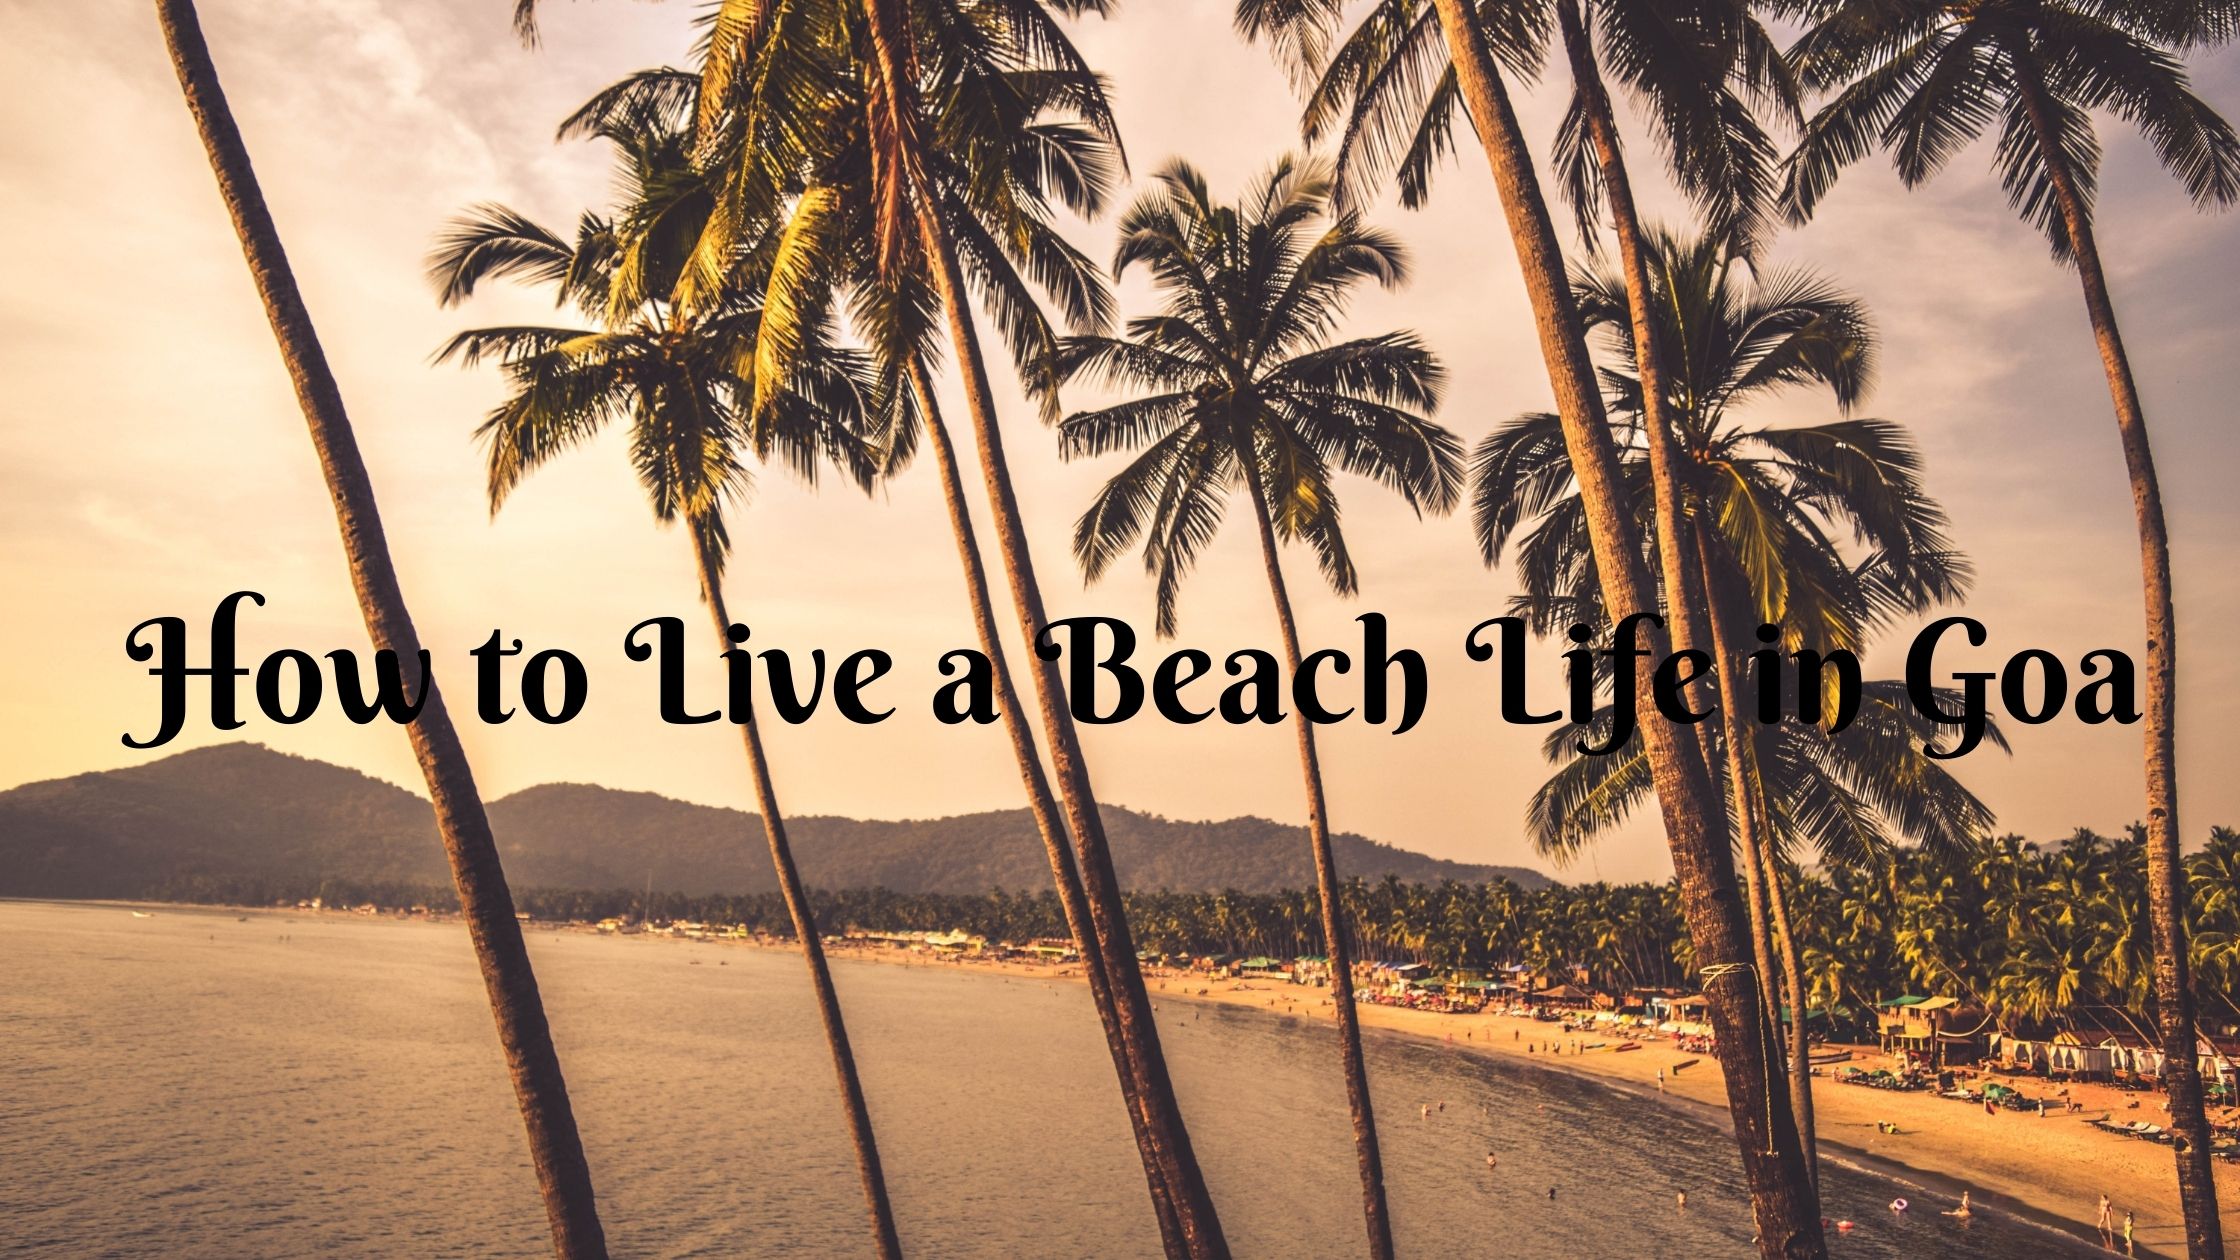 How to live a beach life in Goa